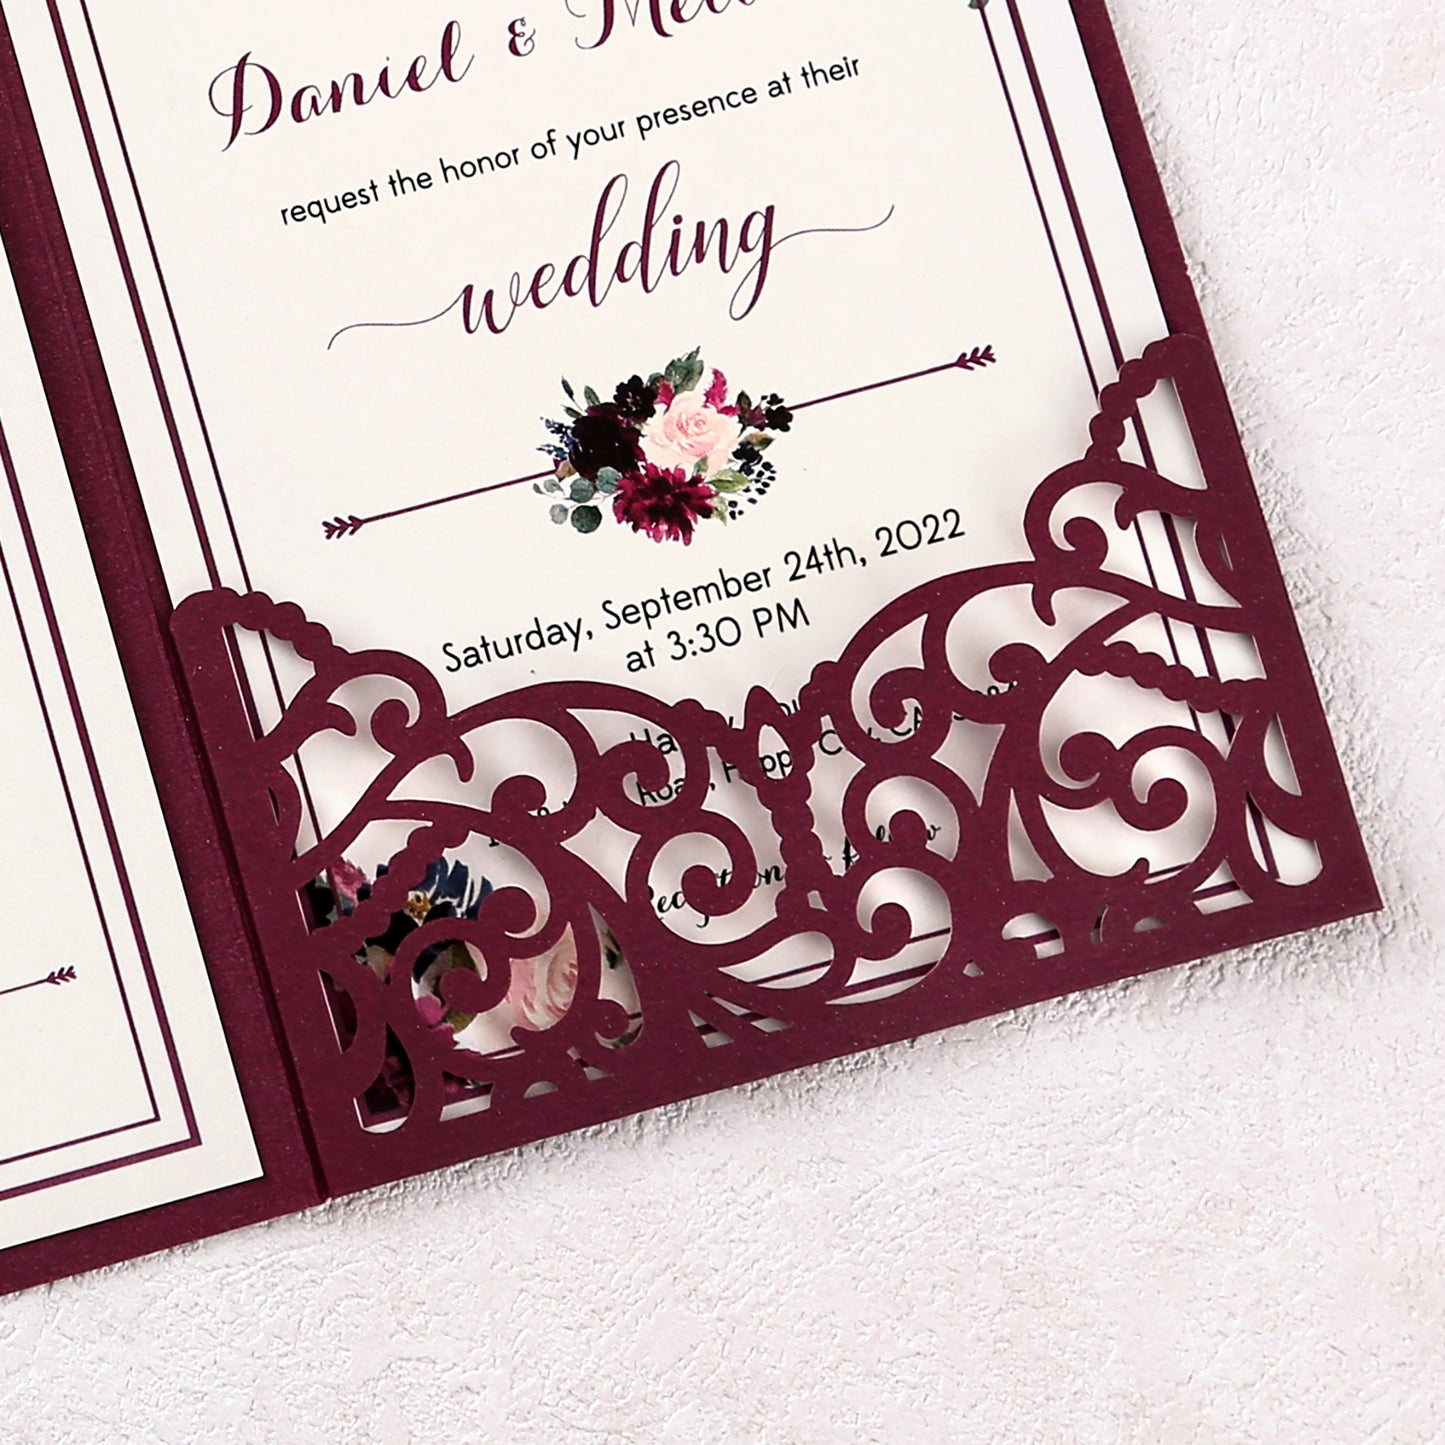 4.7 x7 inch Burgundy Laser Cut Wedding Invitations With Envelopes Kit Hollow Rose Pocket And Gold Glitter Belly Band for Wedding Bridal Shower Engagement Invite